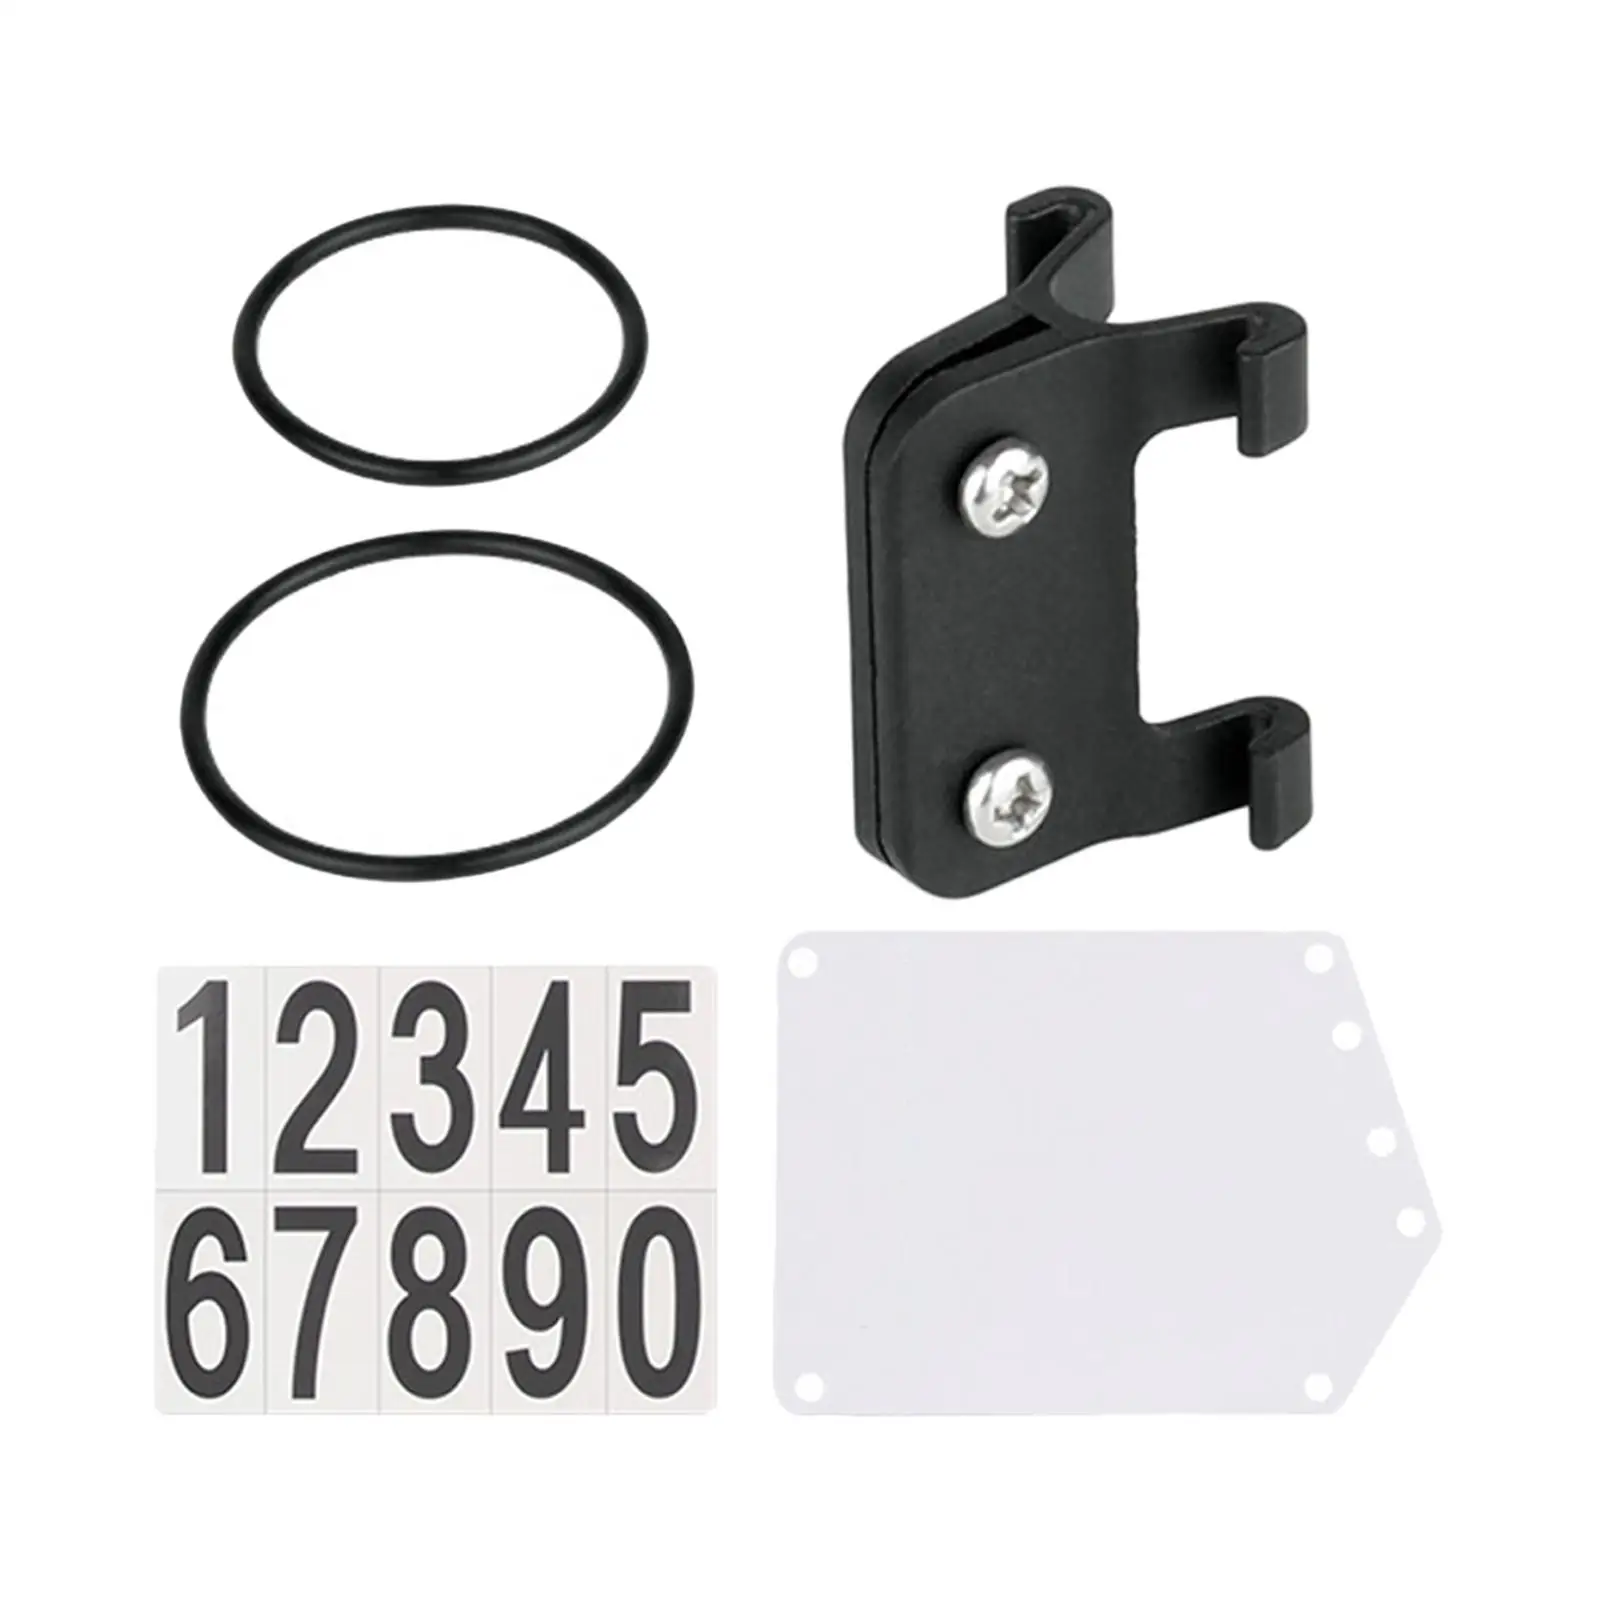 Racing Number Plate and Holder with Bands Race Cards Bracket Quick Release Bracket Seatpost PP for Cycling Triathlon Race Bike